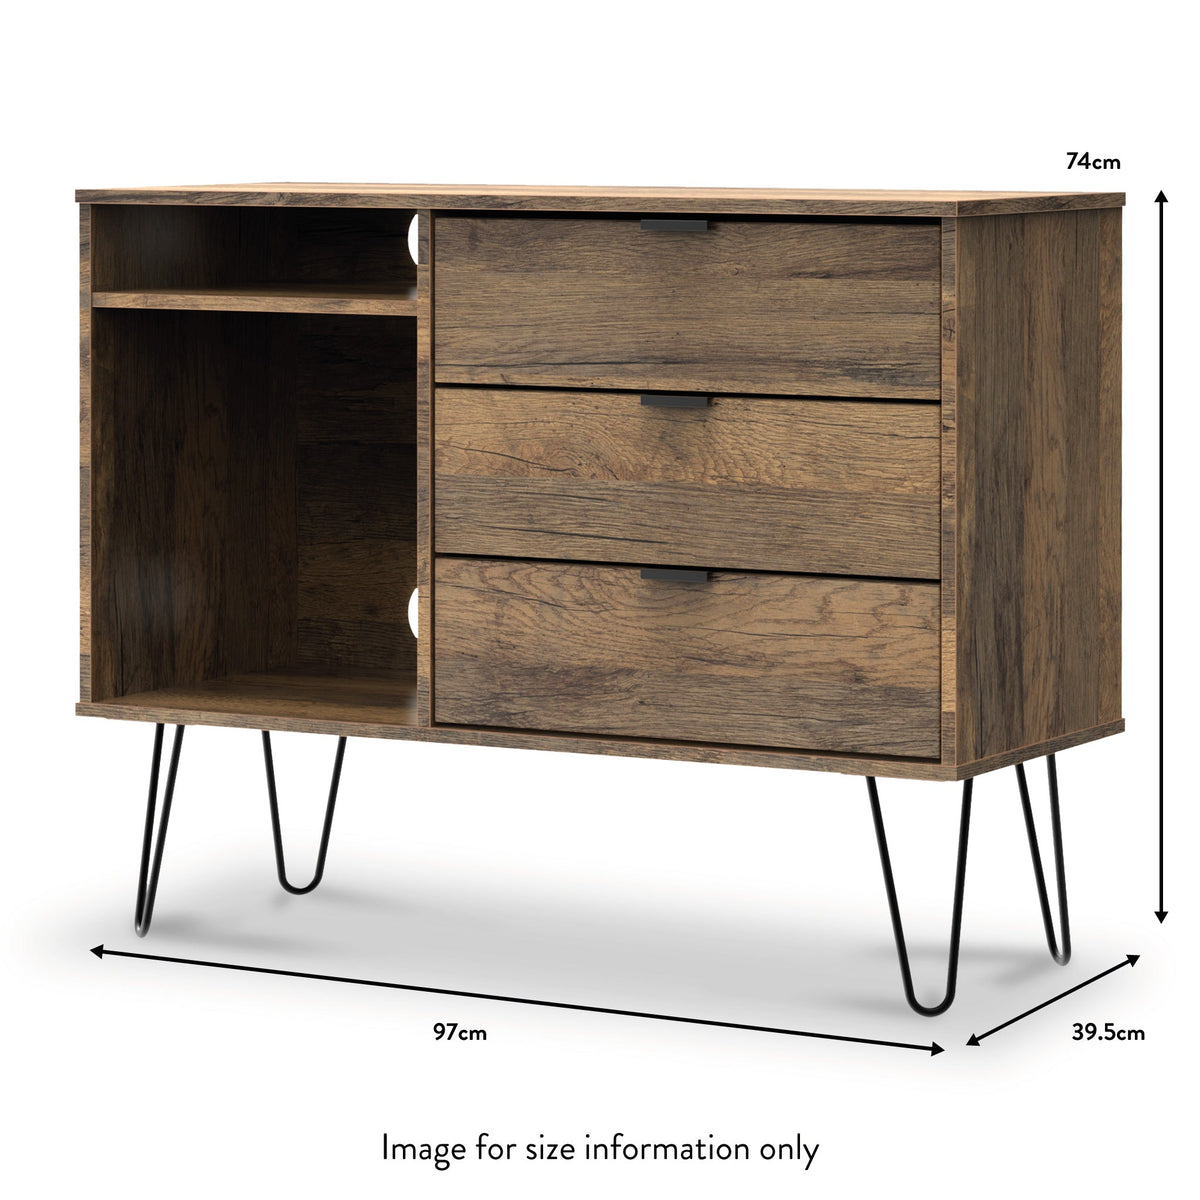 Moreno Rustic Oak 3 Drawer Tv Unit with Black Hairpin Legs dimension guide